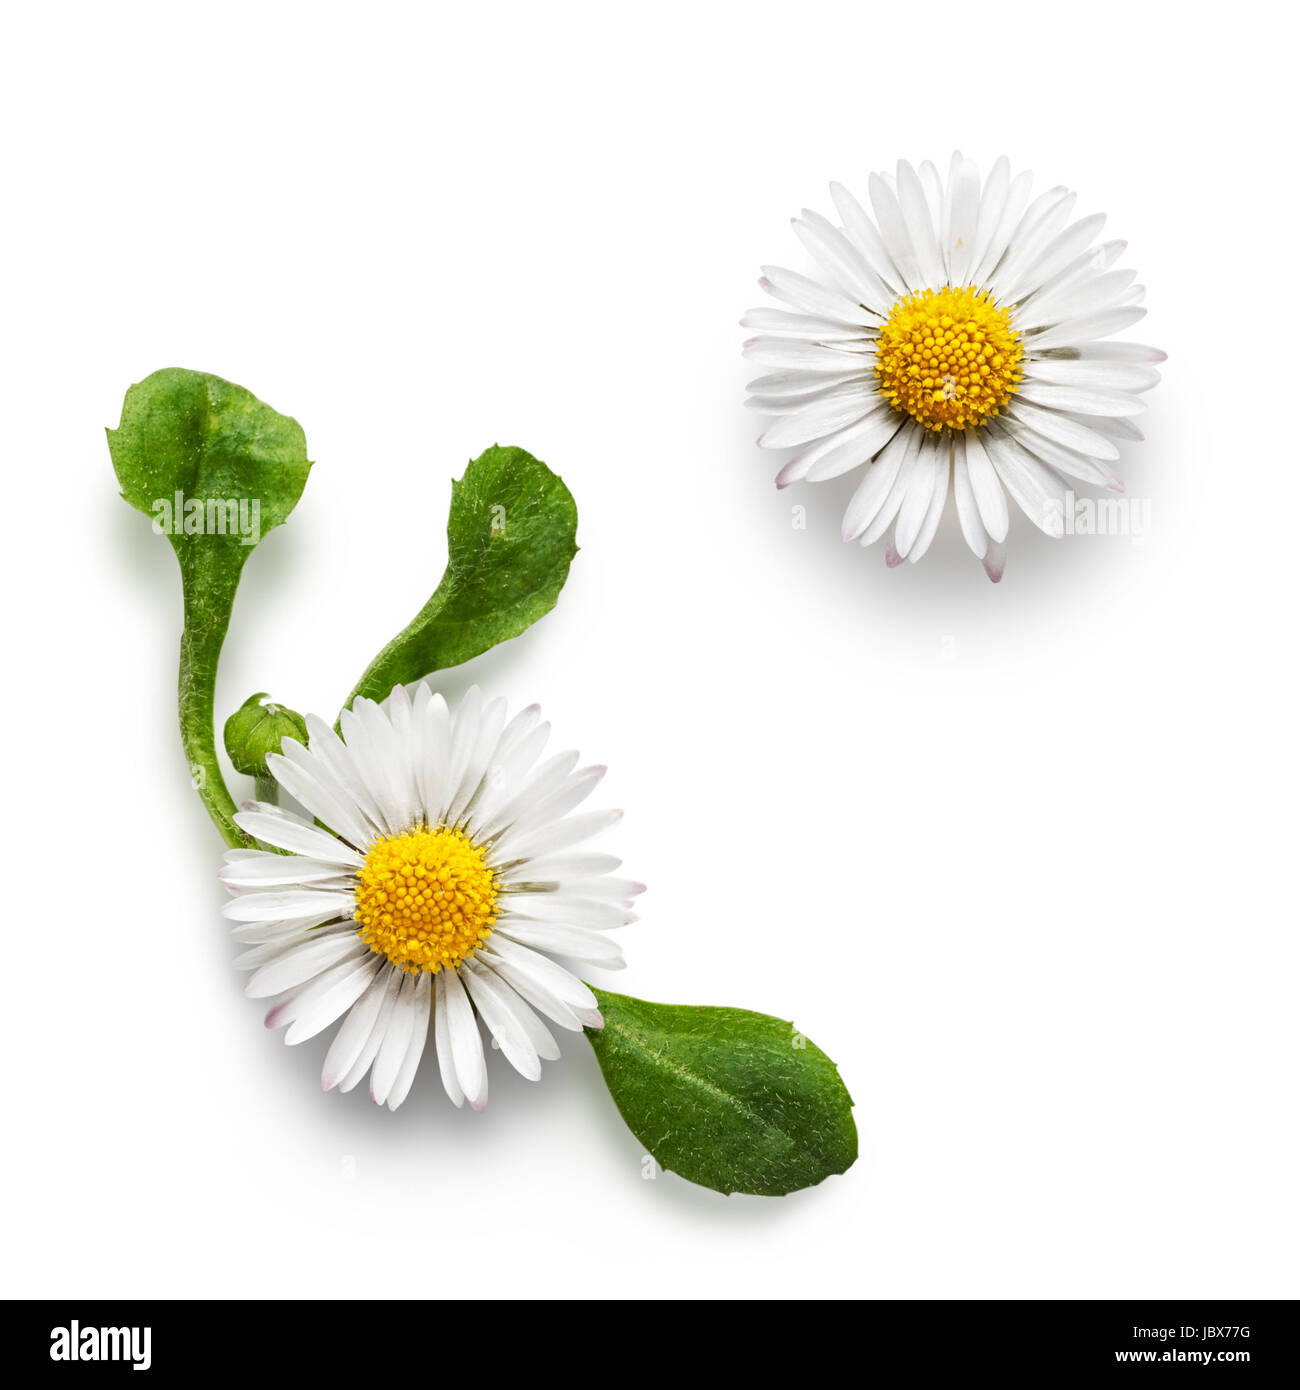 Small daisy bellis perennis flowers collection isolated on white background Stock Photo